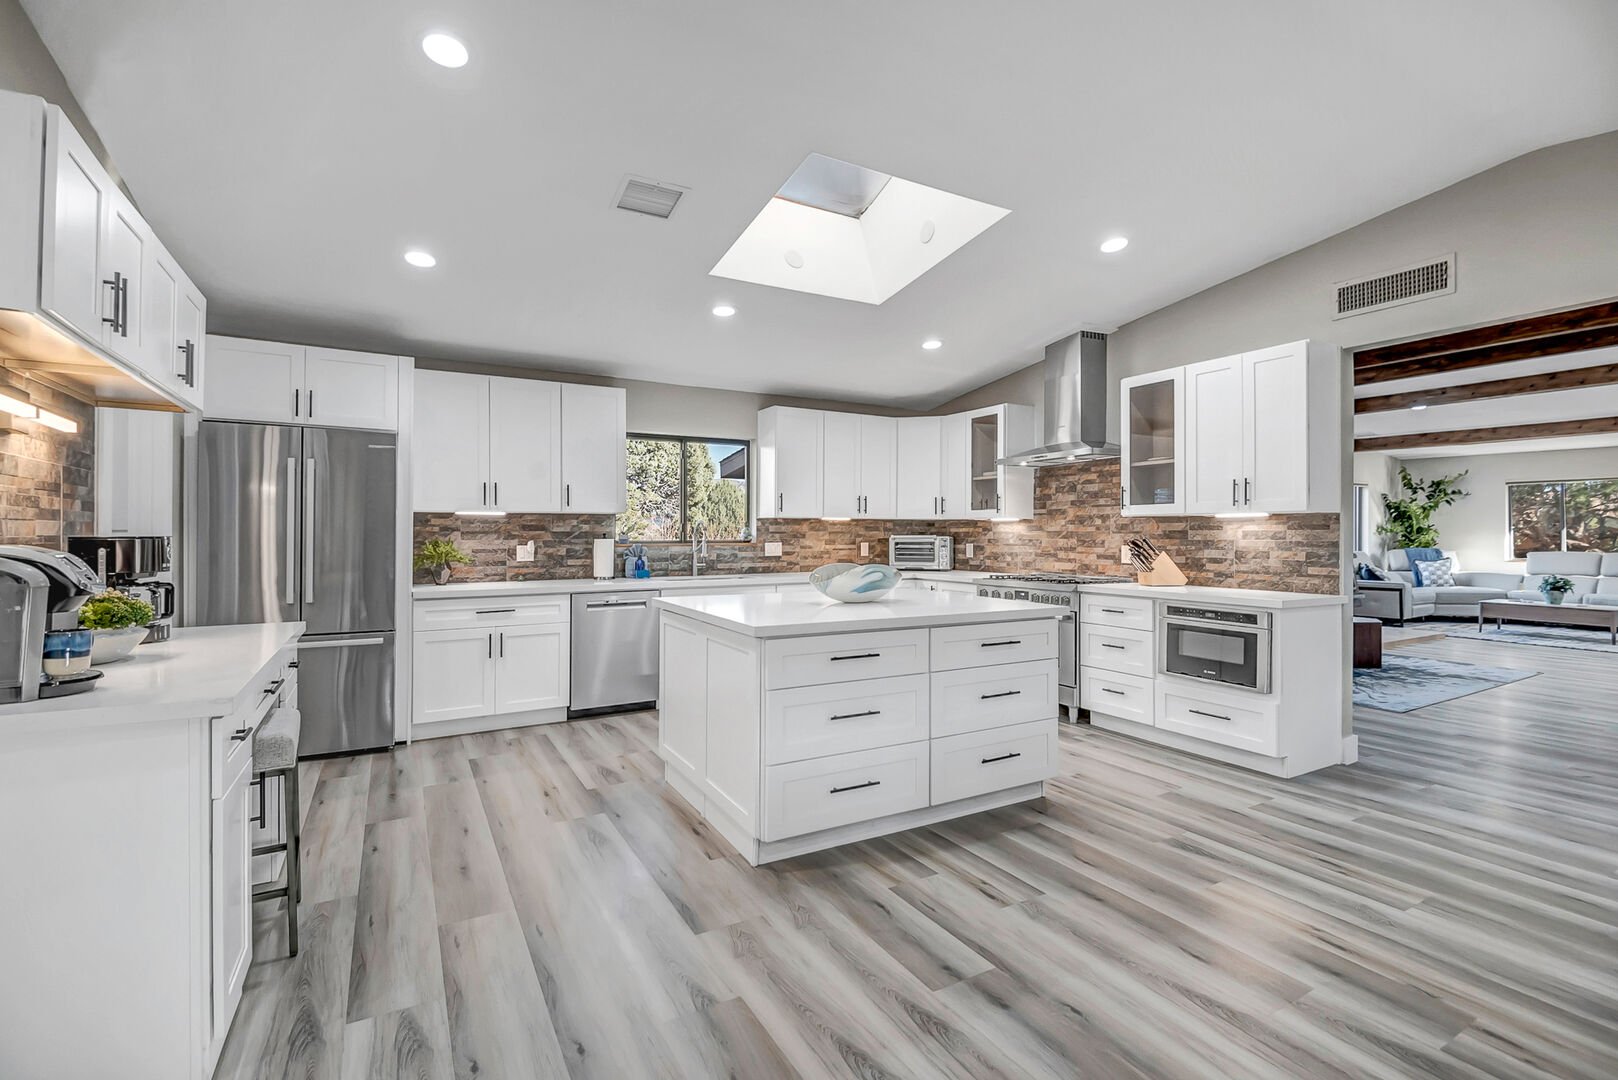 Completely remodeled kitchen with high-end stainless steel appliances, including a 6-burner gas stove, and large kitchen island